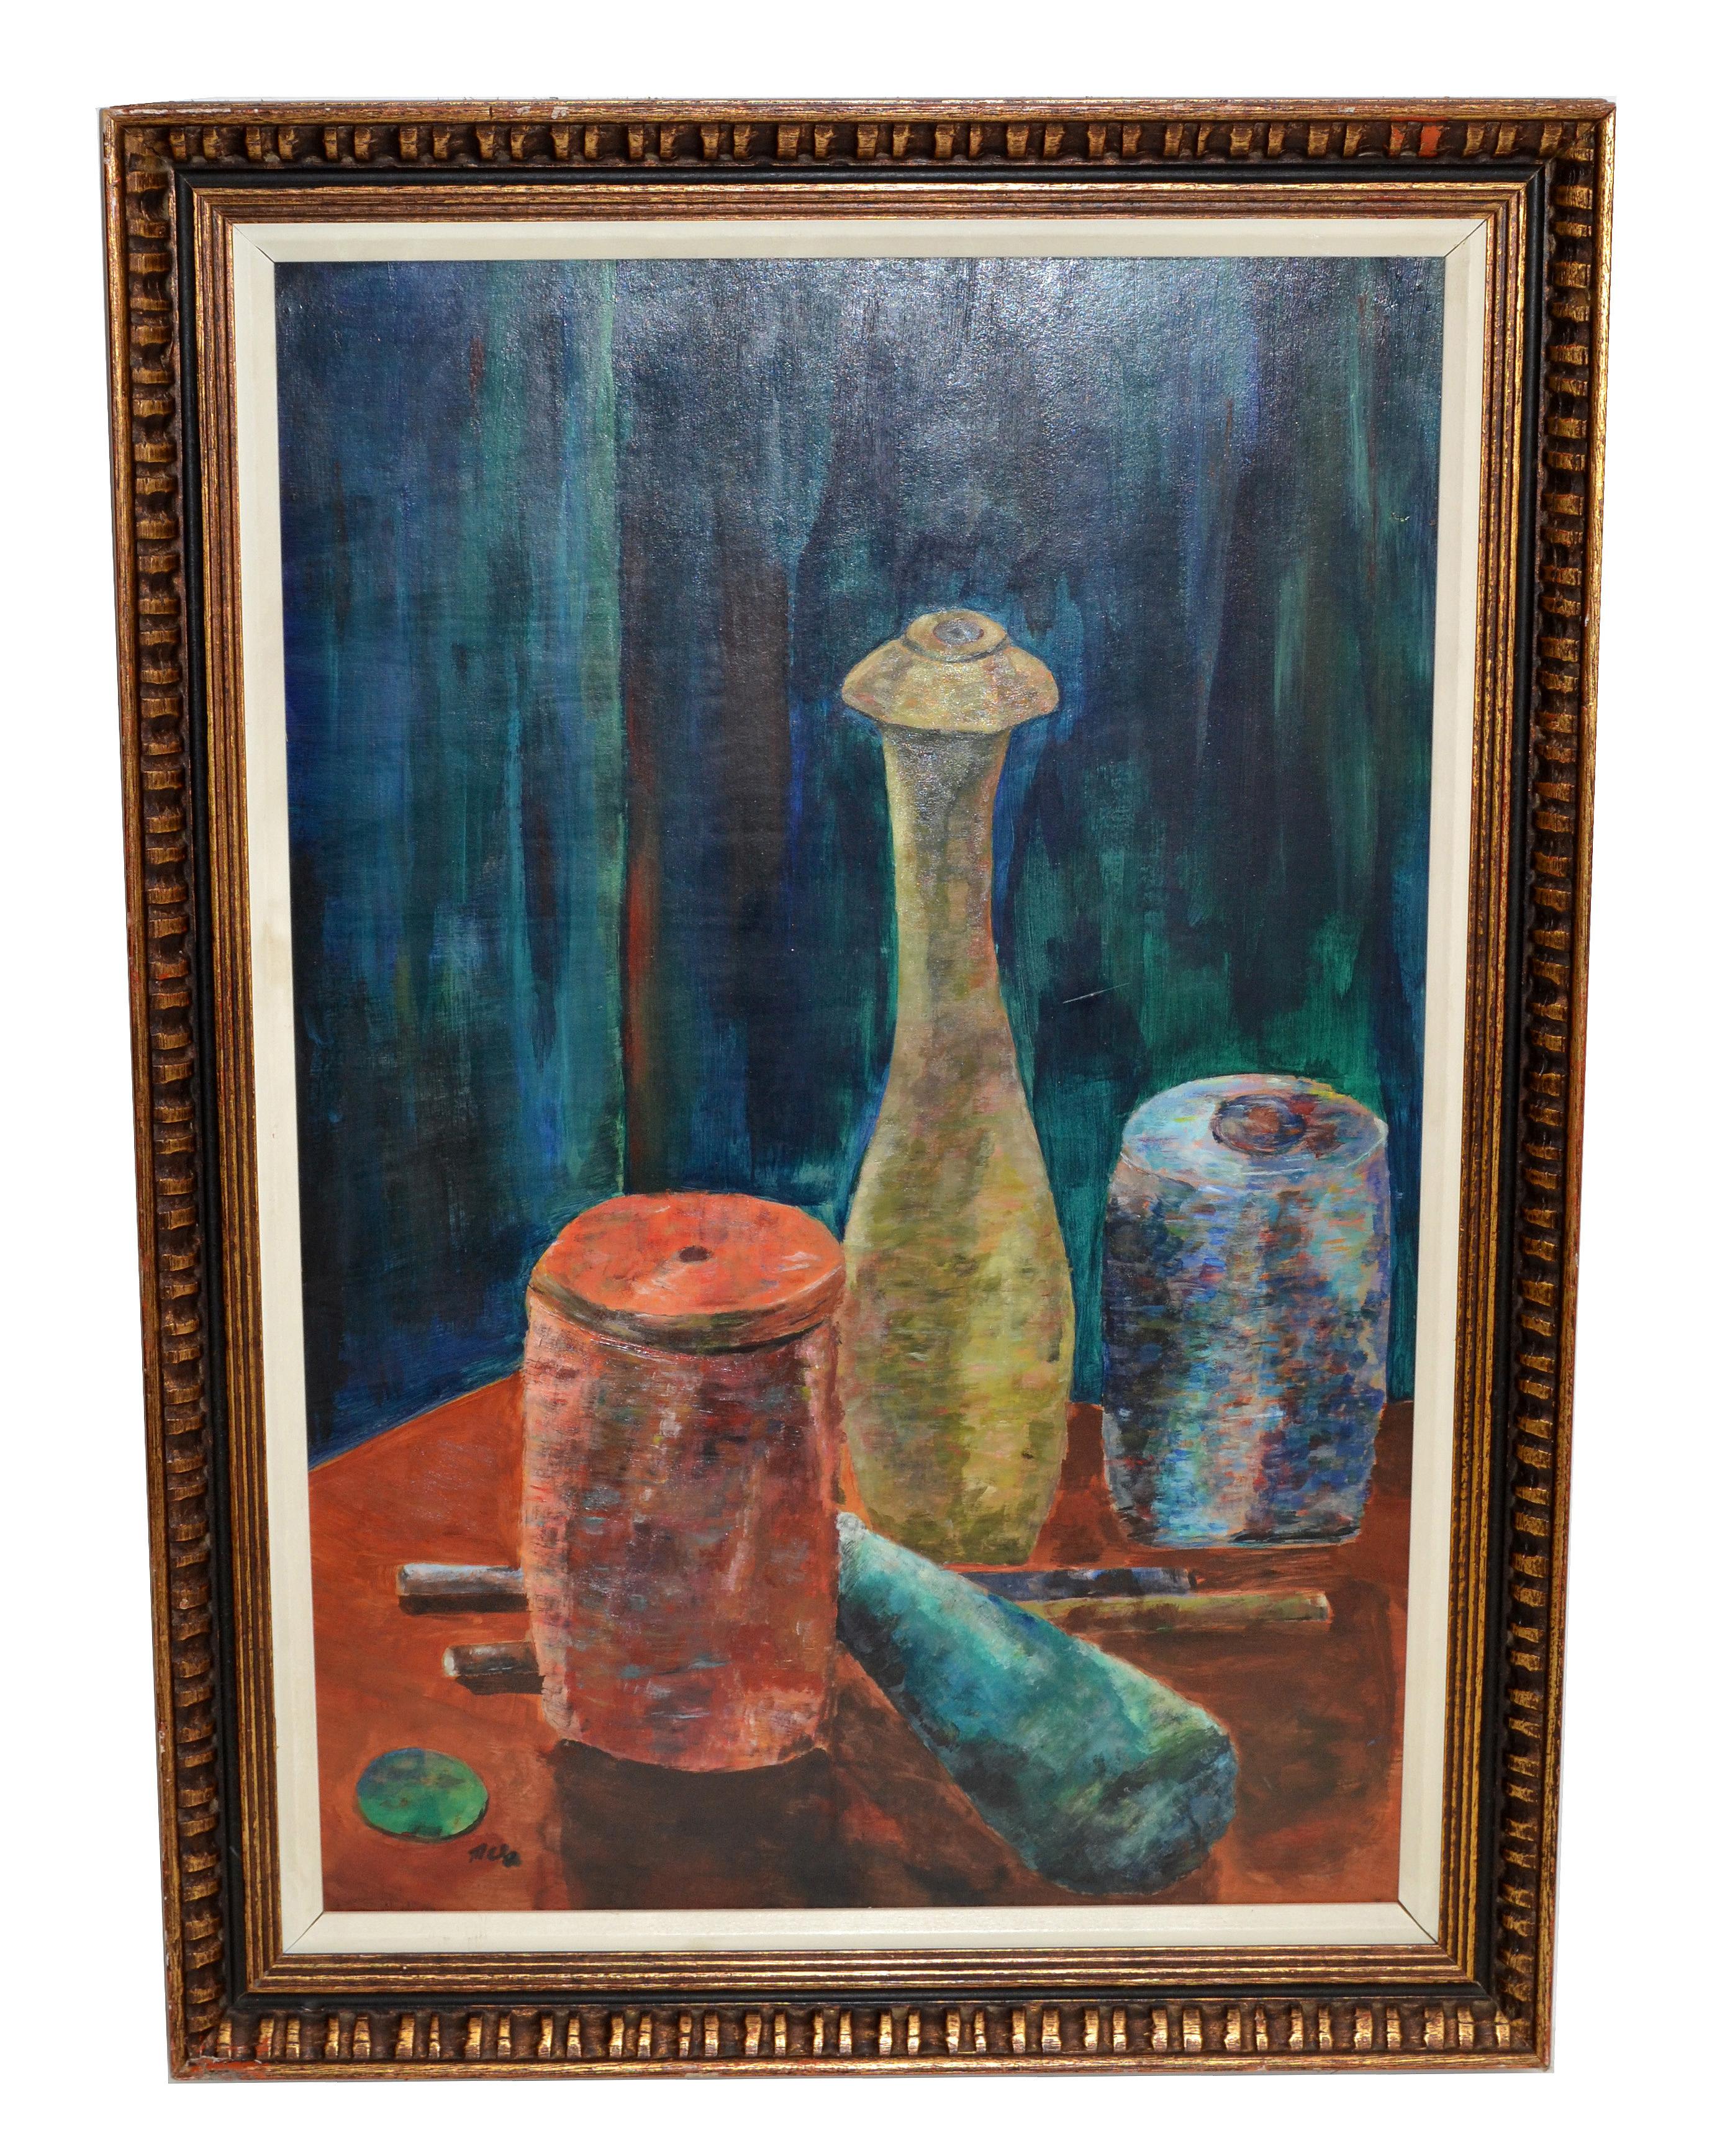 Hand-Painted Antique Framed Oil on Board Painting of Three Clay Vessels Marked by Artist 1950 For Sale